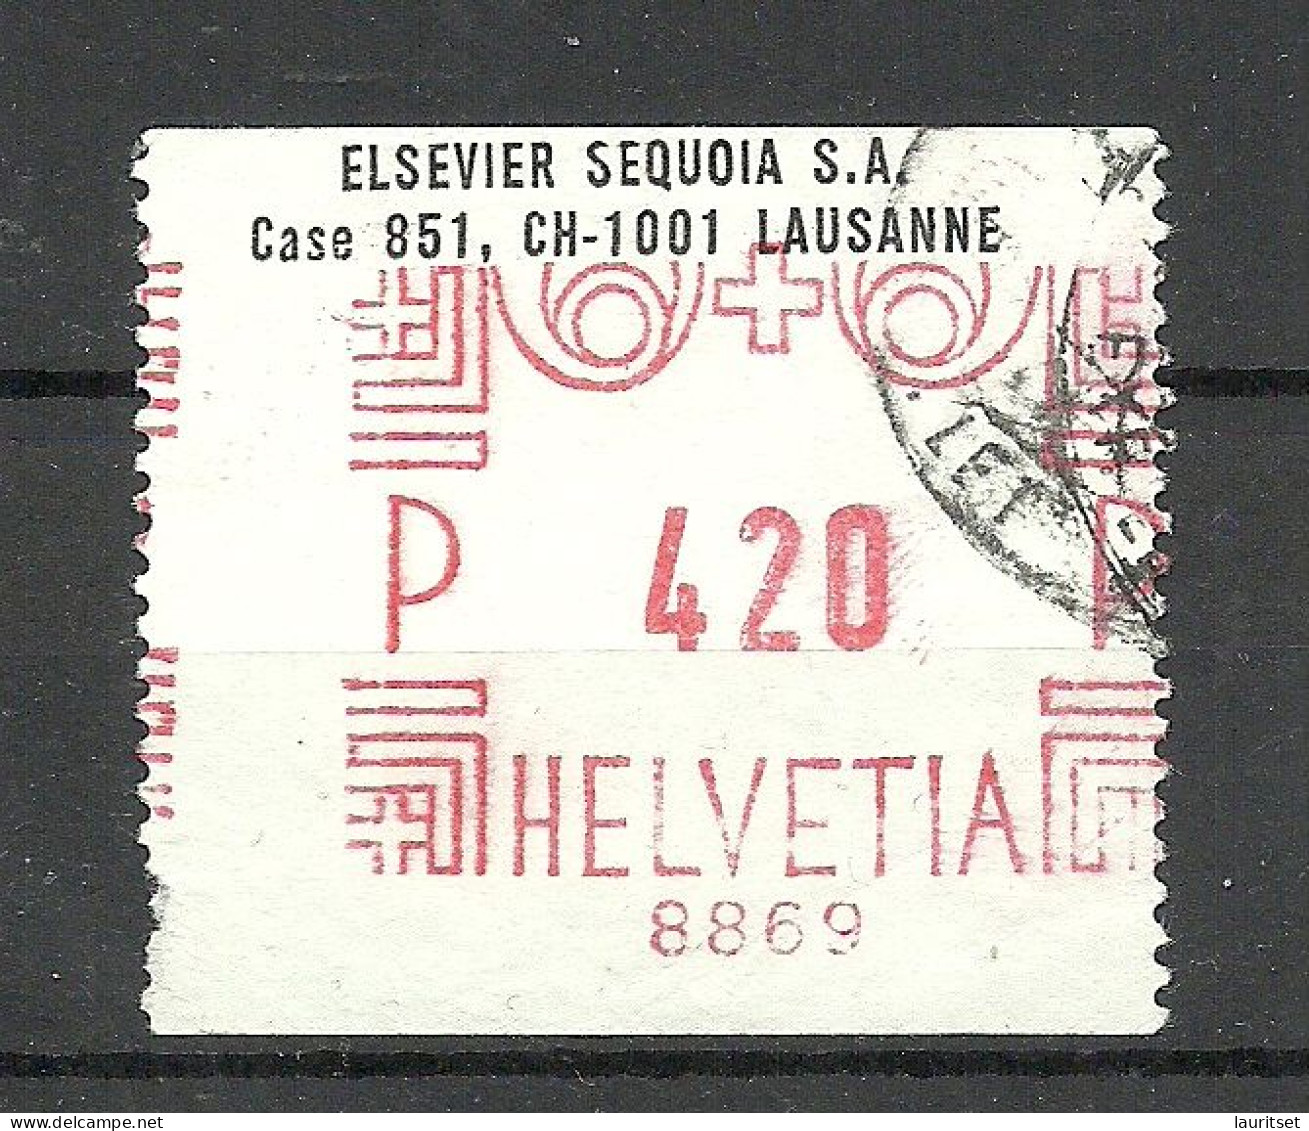 SCHWEIZ Switzerland - Automatenmarke O 1975 LAUSANNE Elsevier Sequoia S.A. - Automatic Stamps